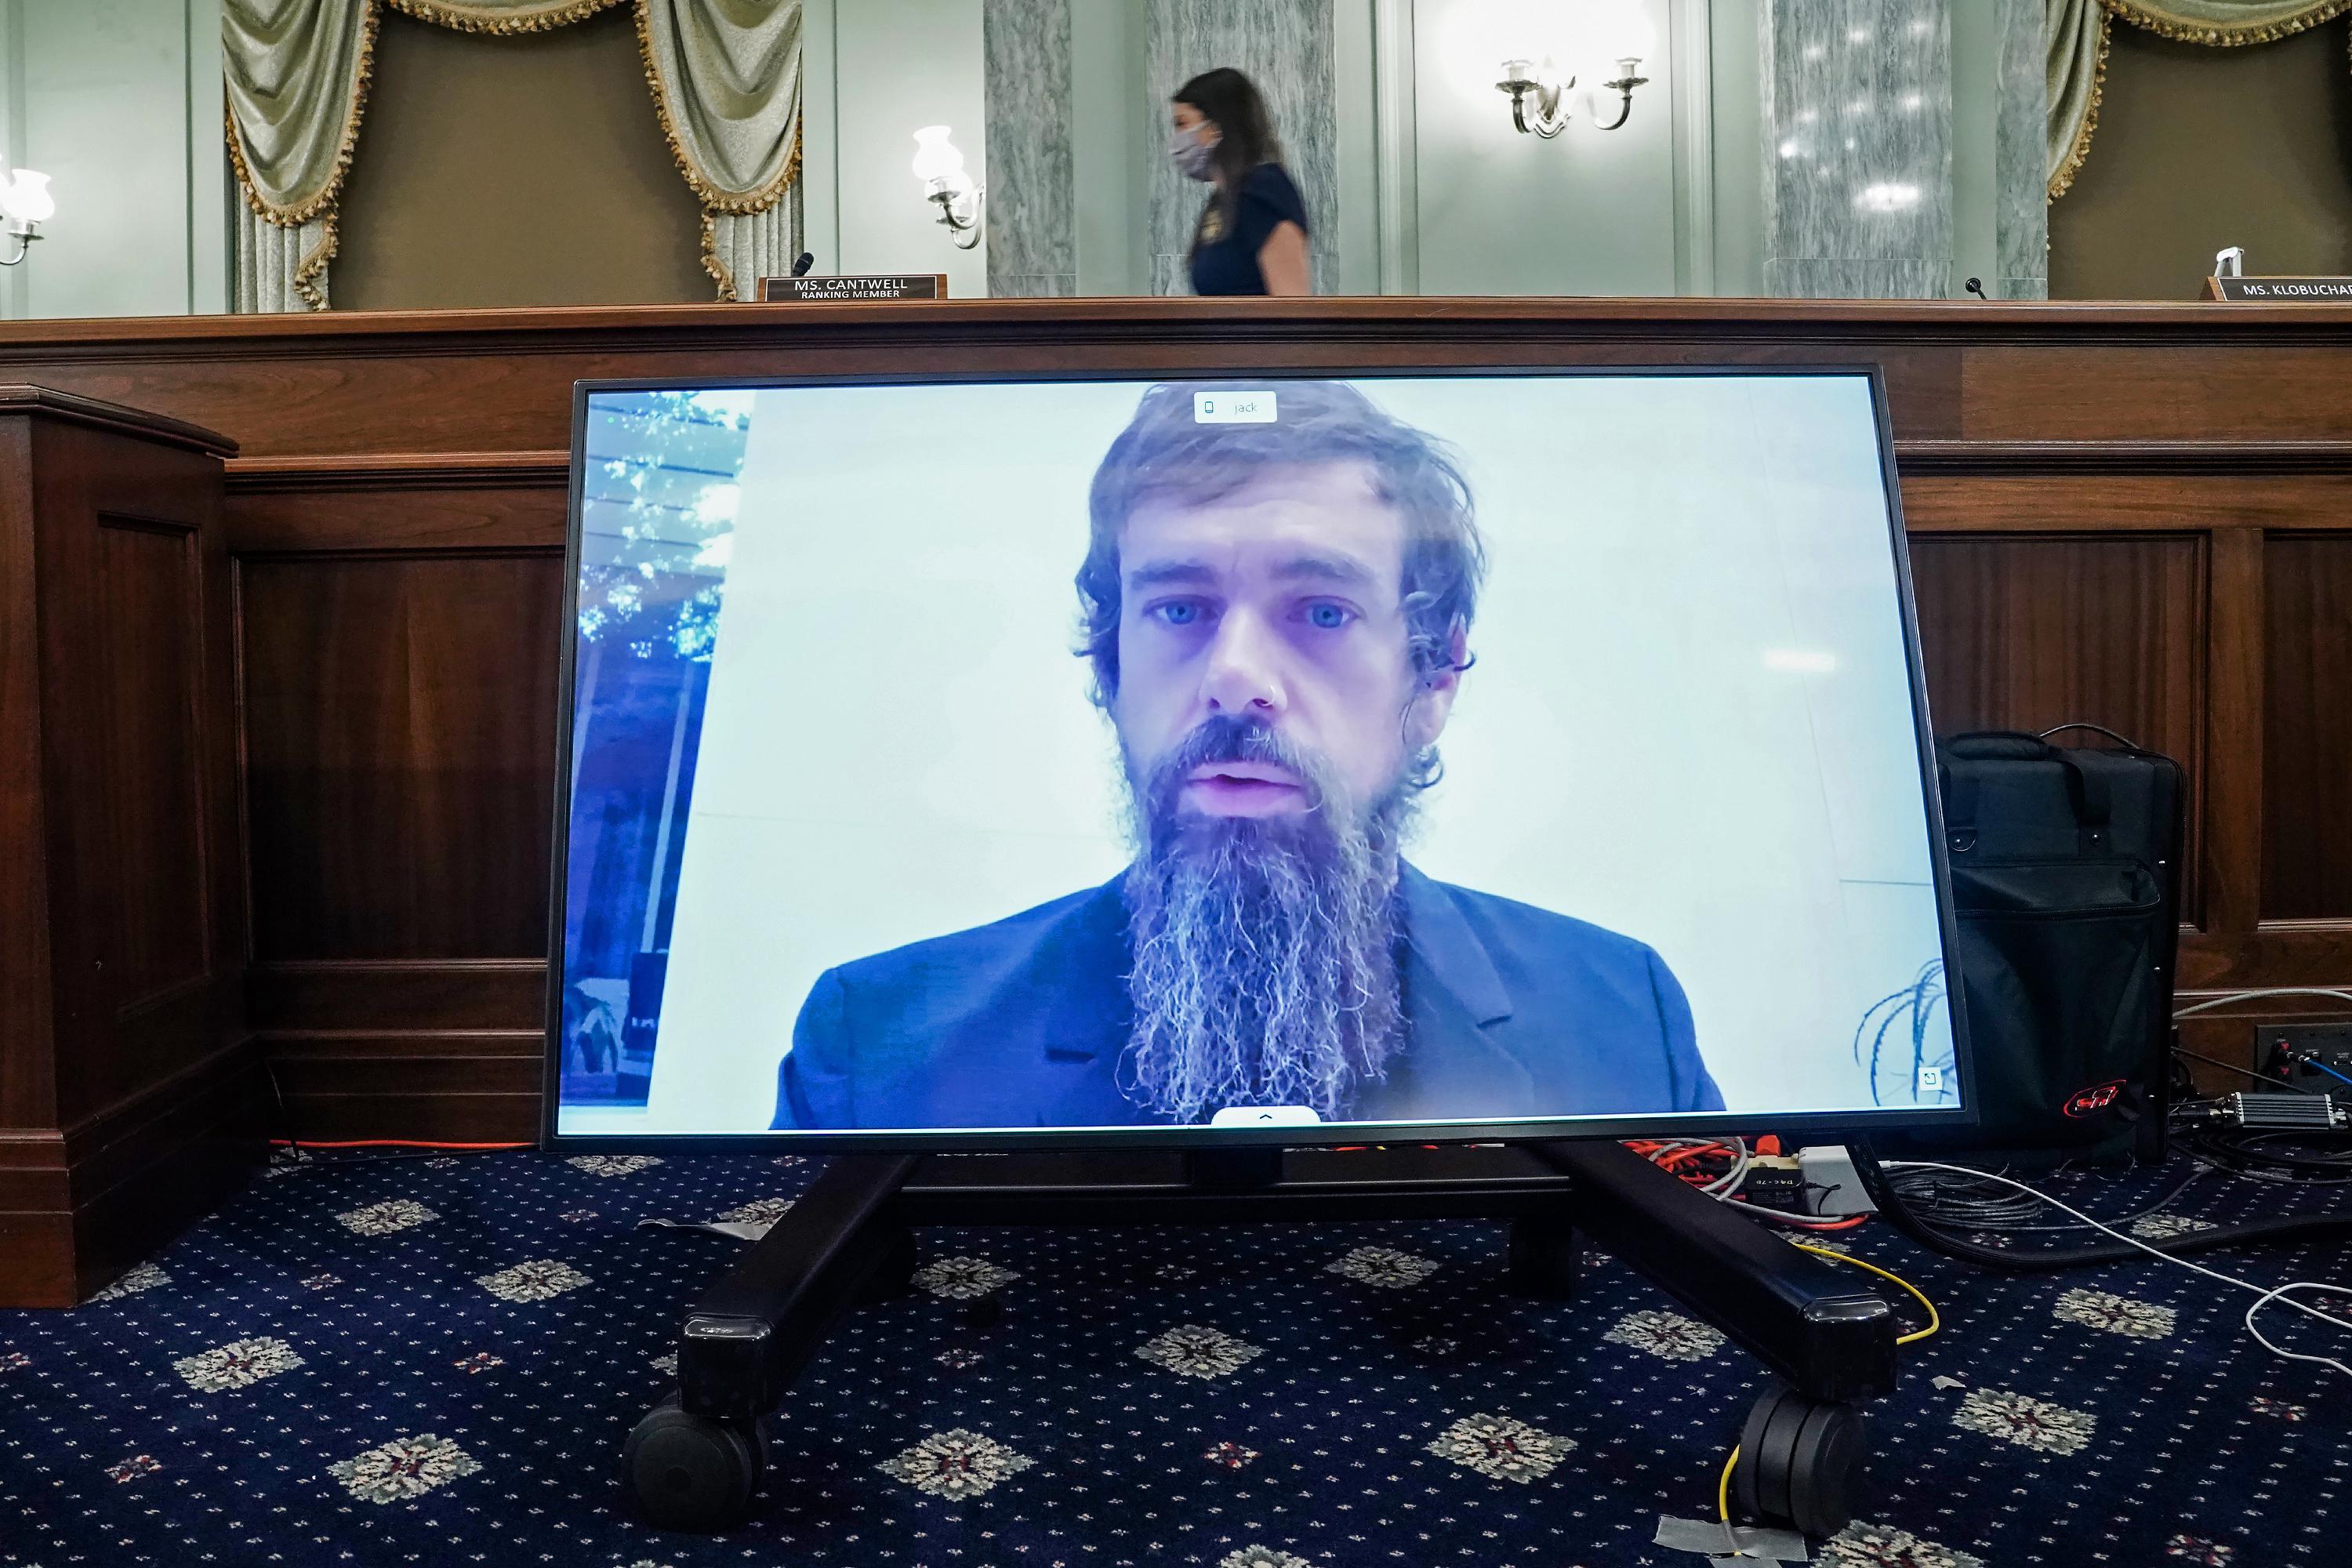 Jack Dorsey appears with unkempt hair and a long, scraggly brown and gray beard on a screen sitting on the floor of a Senate hearing room